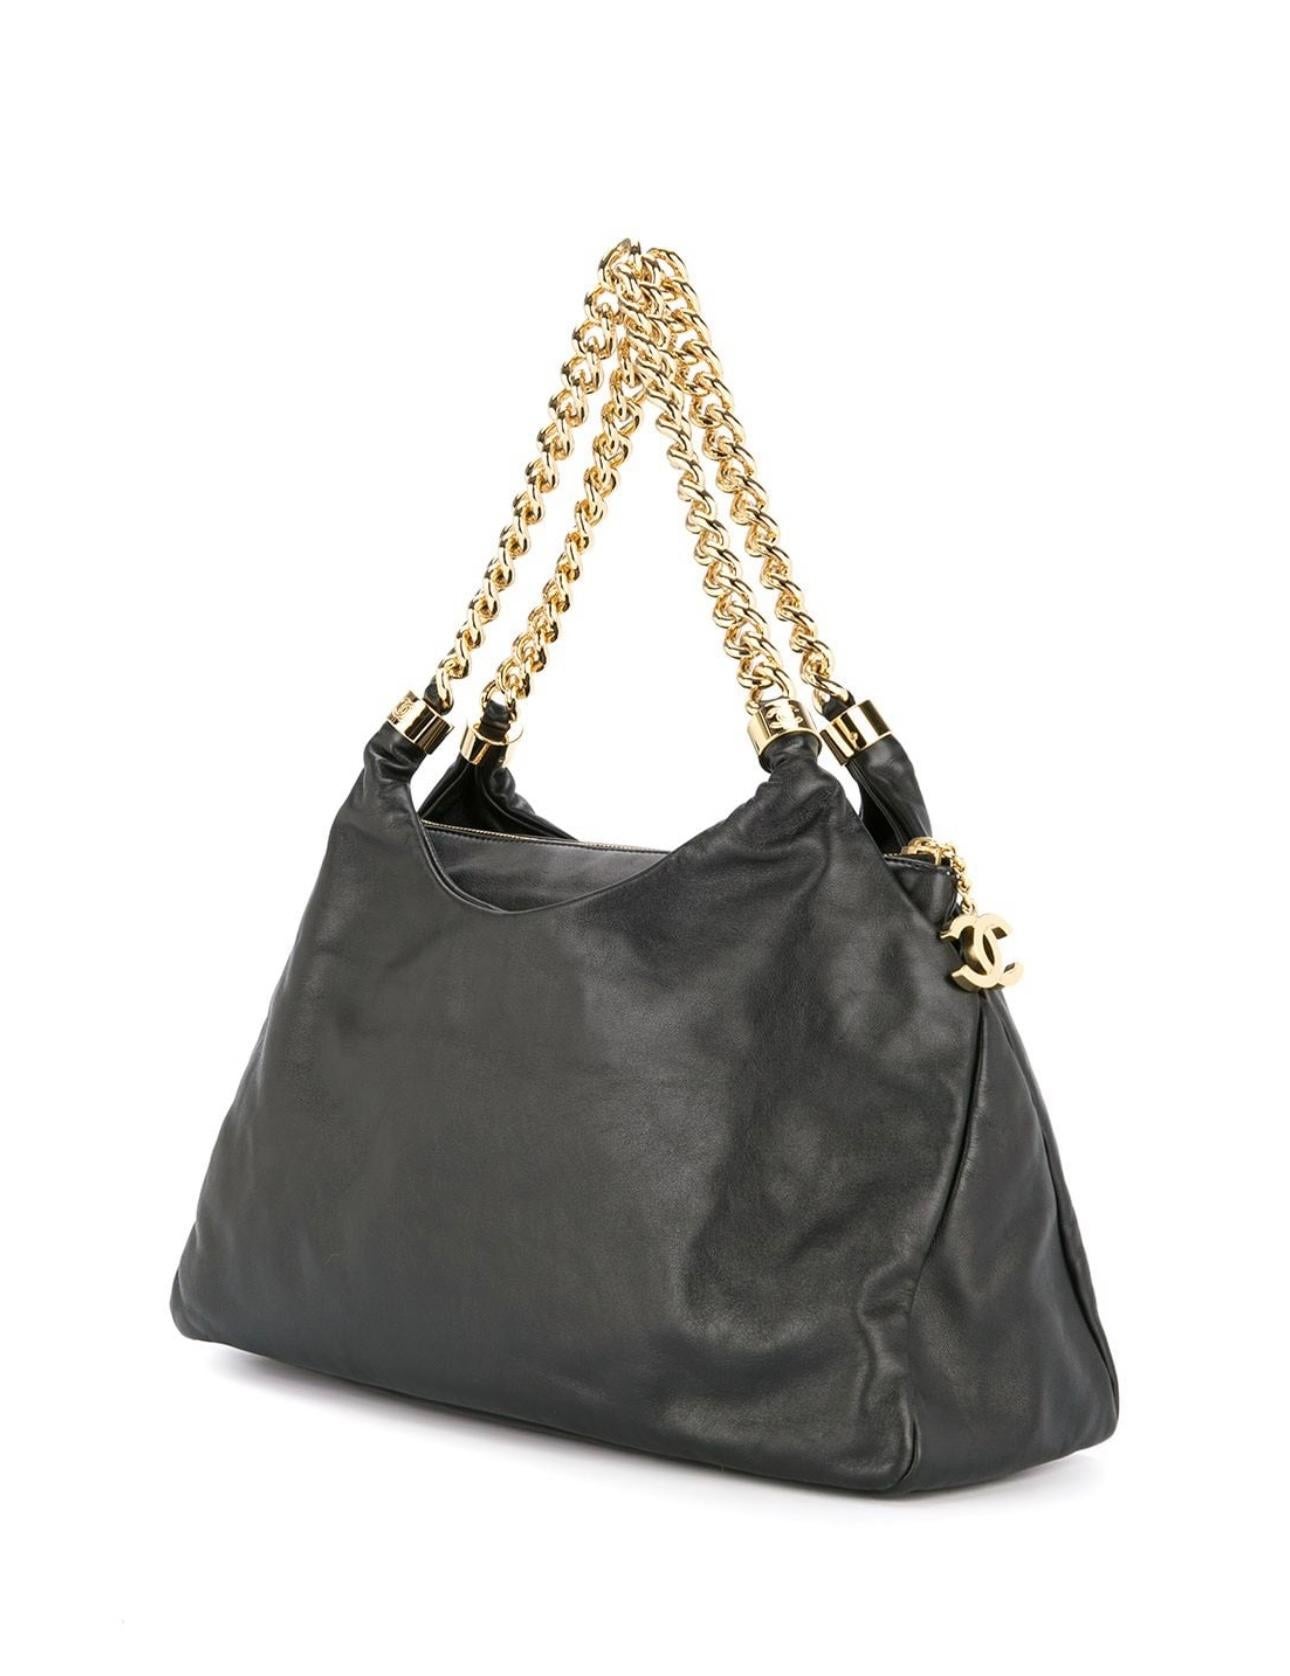 Chanel 2009 CC Logo Thick Chain Black Calfskin Hobo Shoulder Tote  For Sale 1